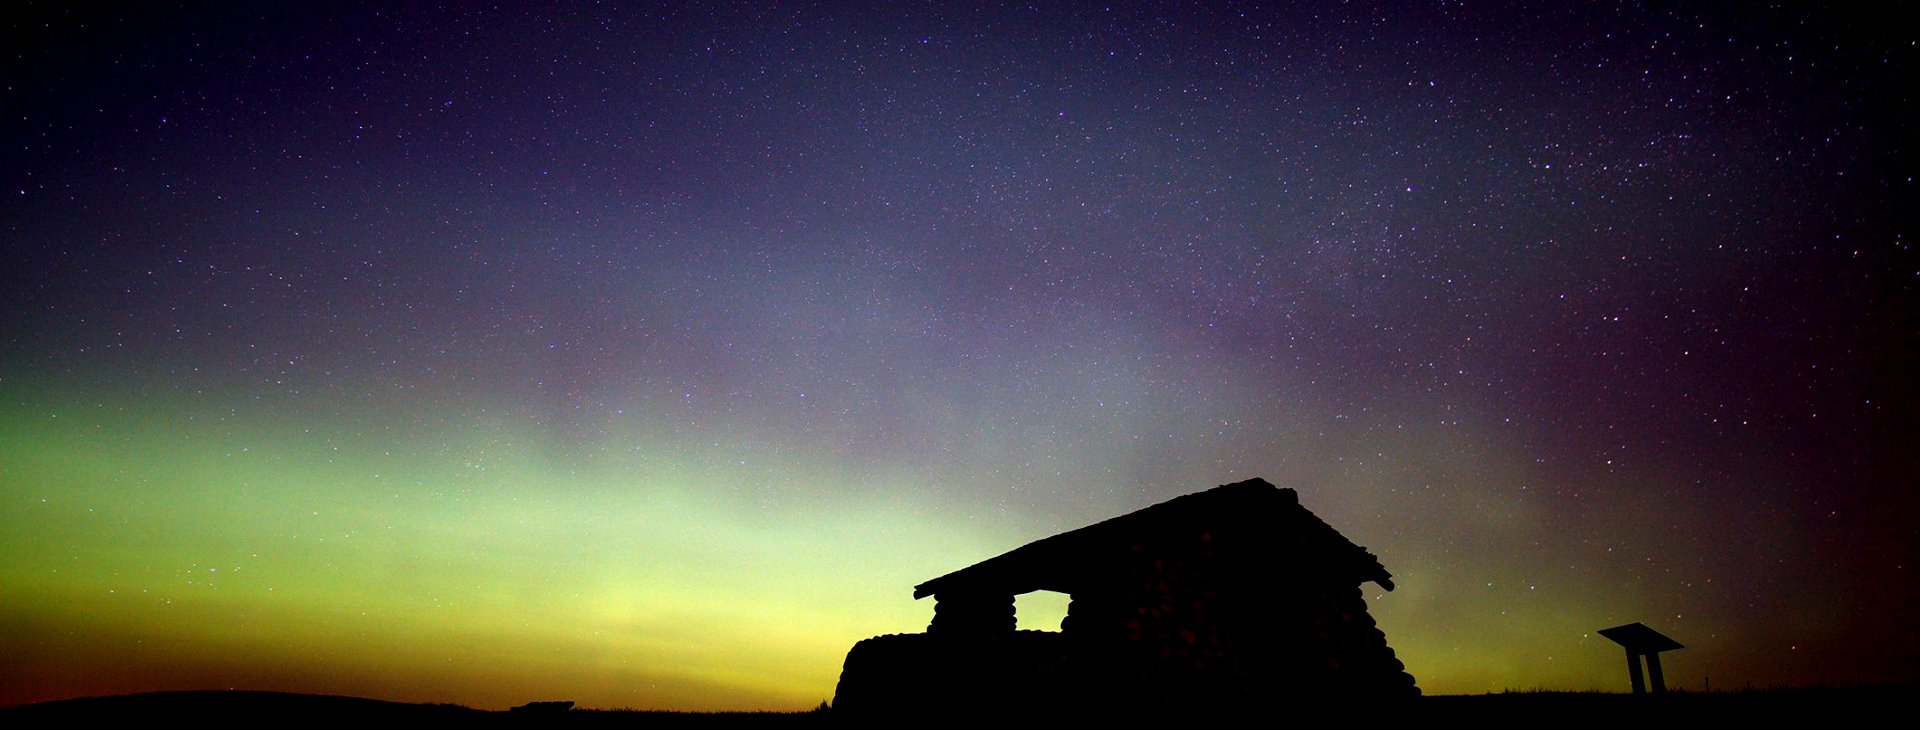 Image is of Double Ditch State Historic Site at night with the auroras overhead.